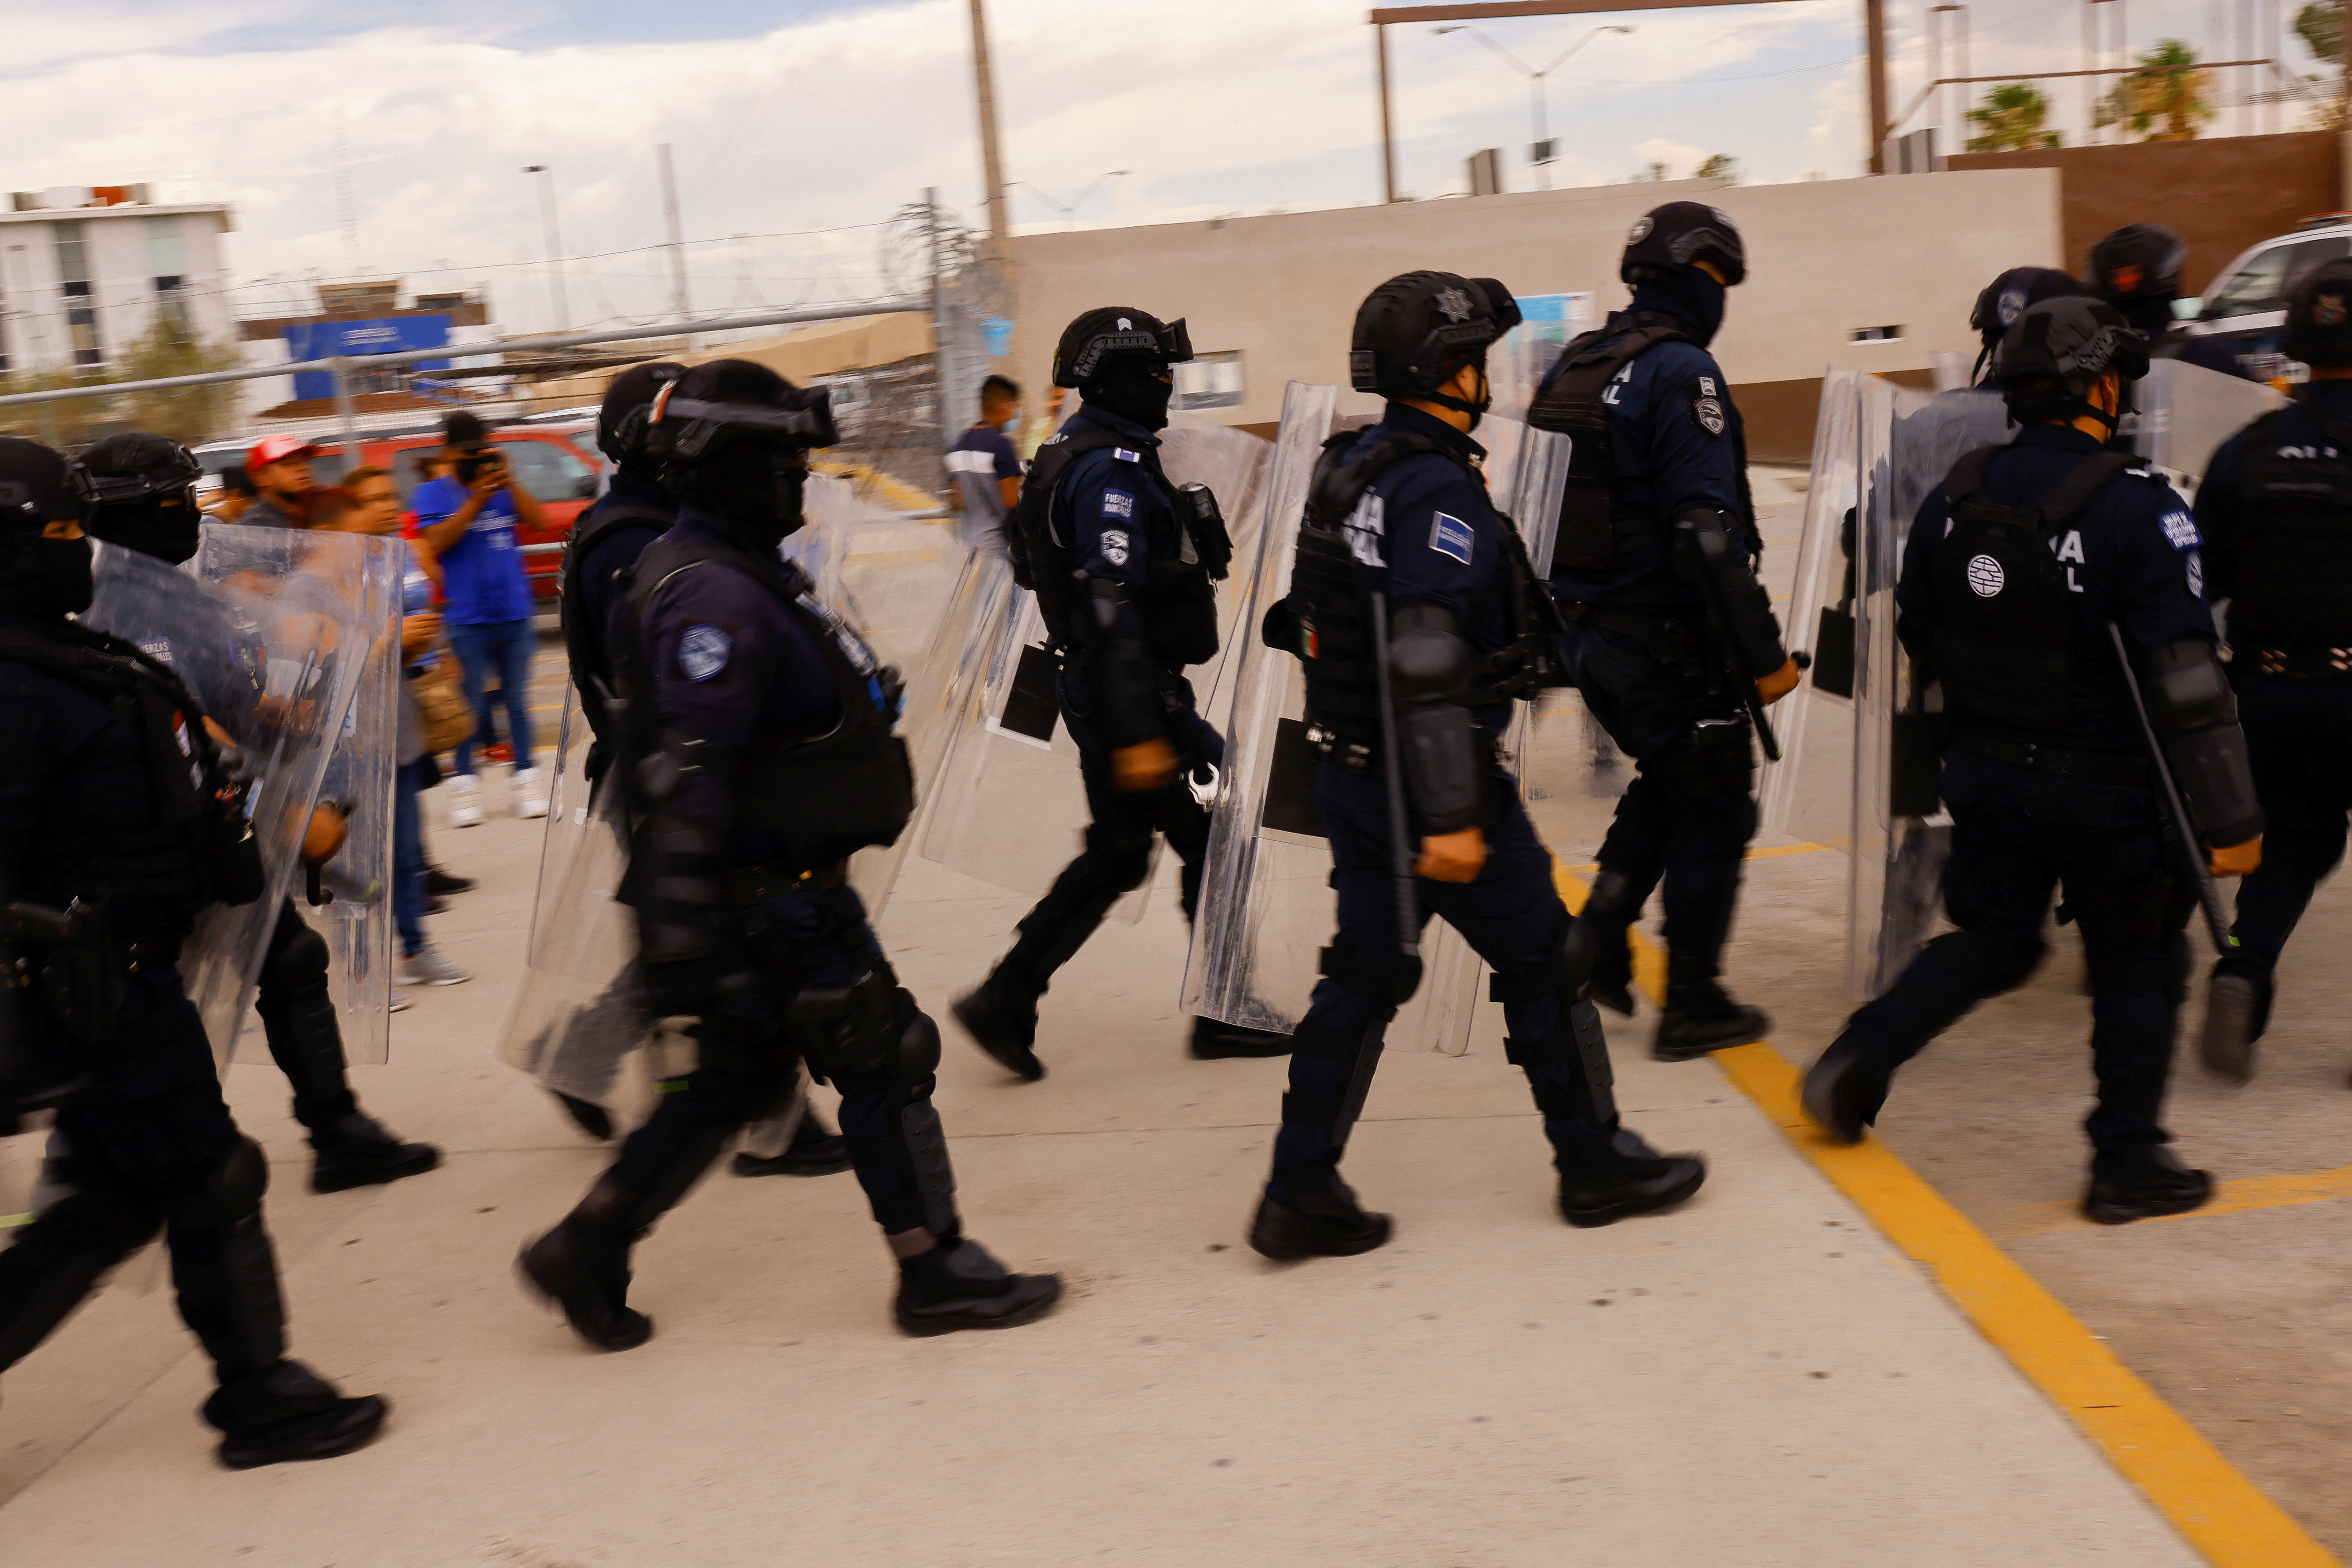 Security elements arrived at Cereso 3 in Ciudad Juárez to control a fight between inmates (Photo: REUTERS/Jose Luis Gonzalez)